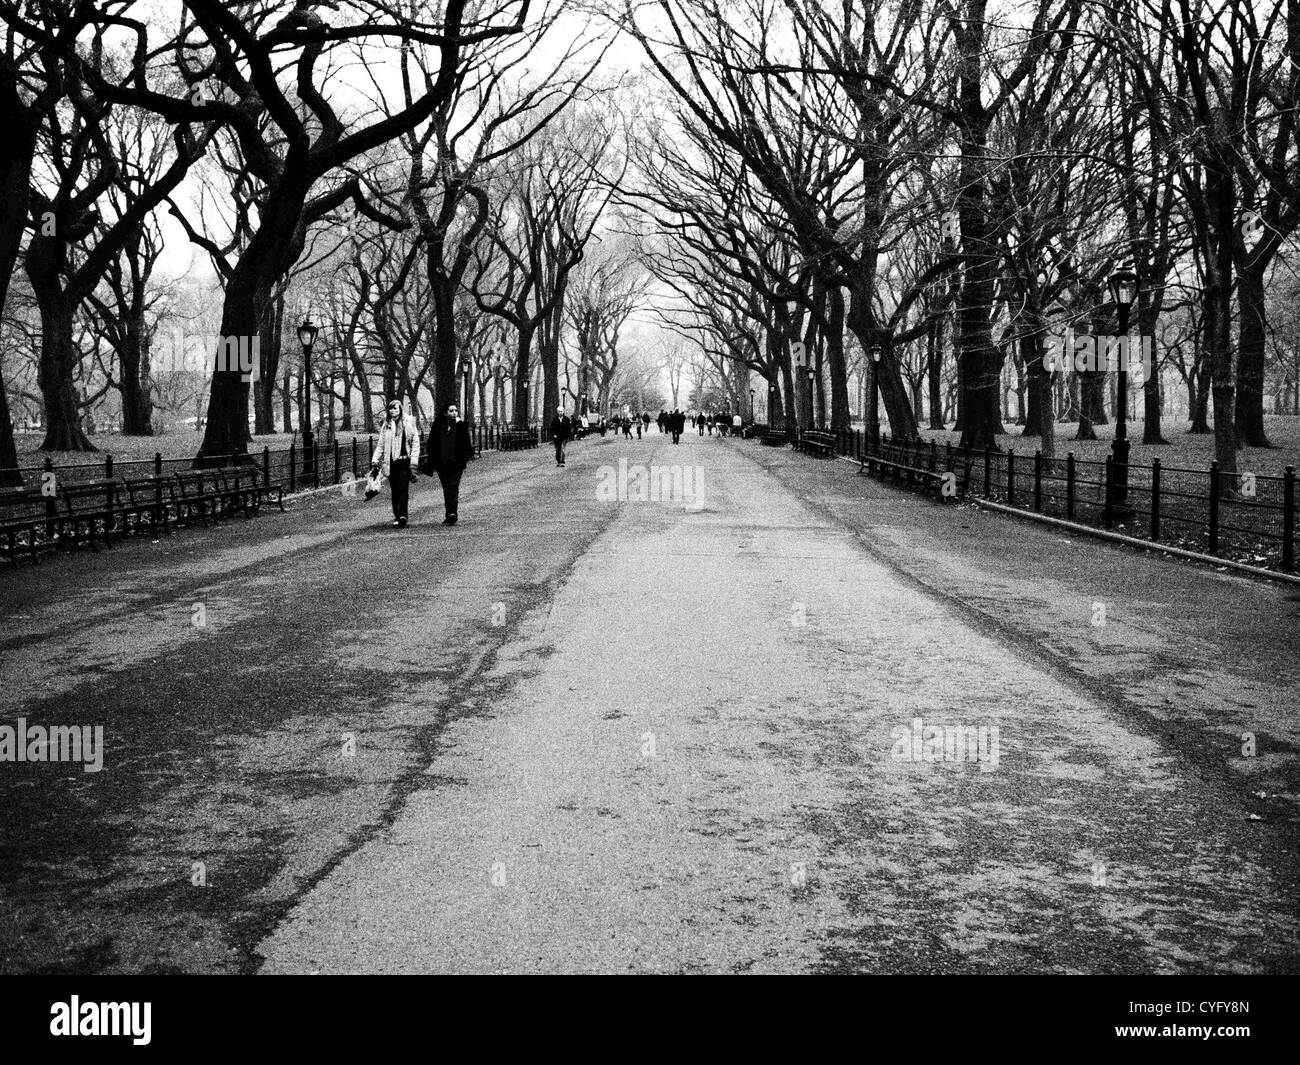 Central park Black and White Stock Photos & Images - Alamy